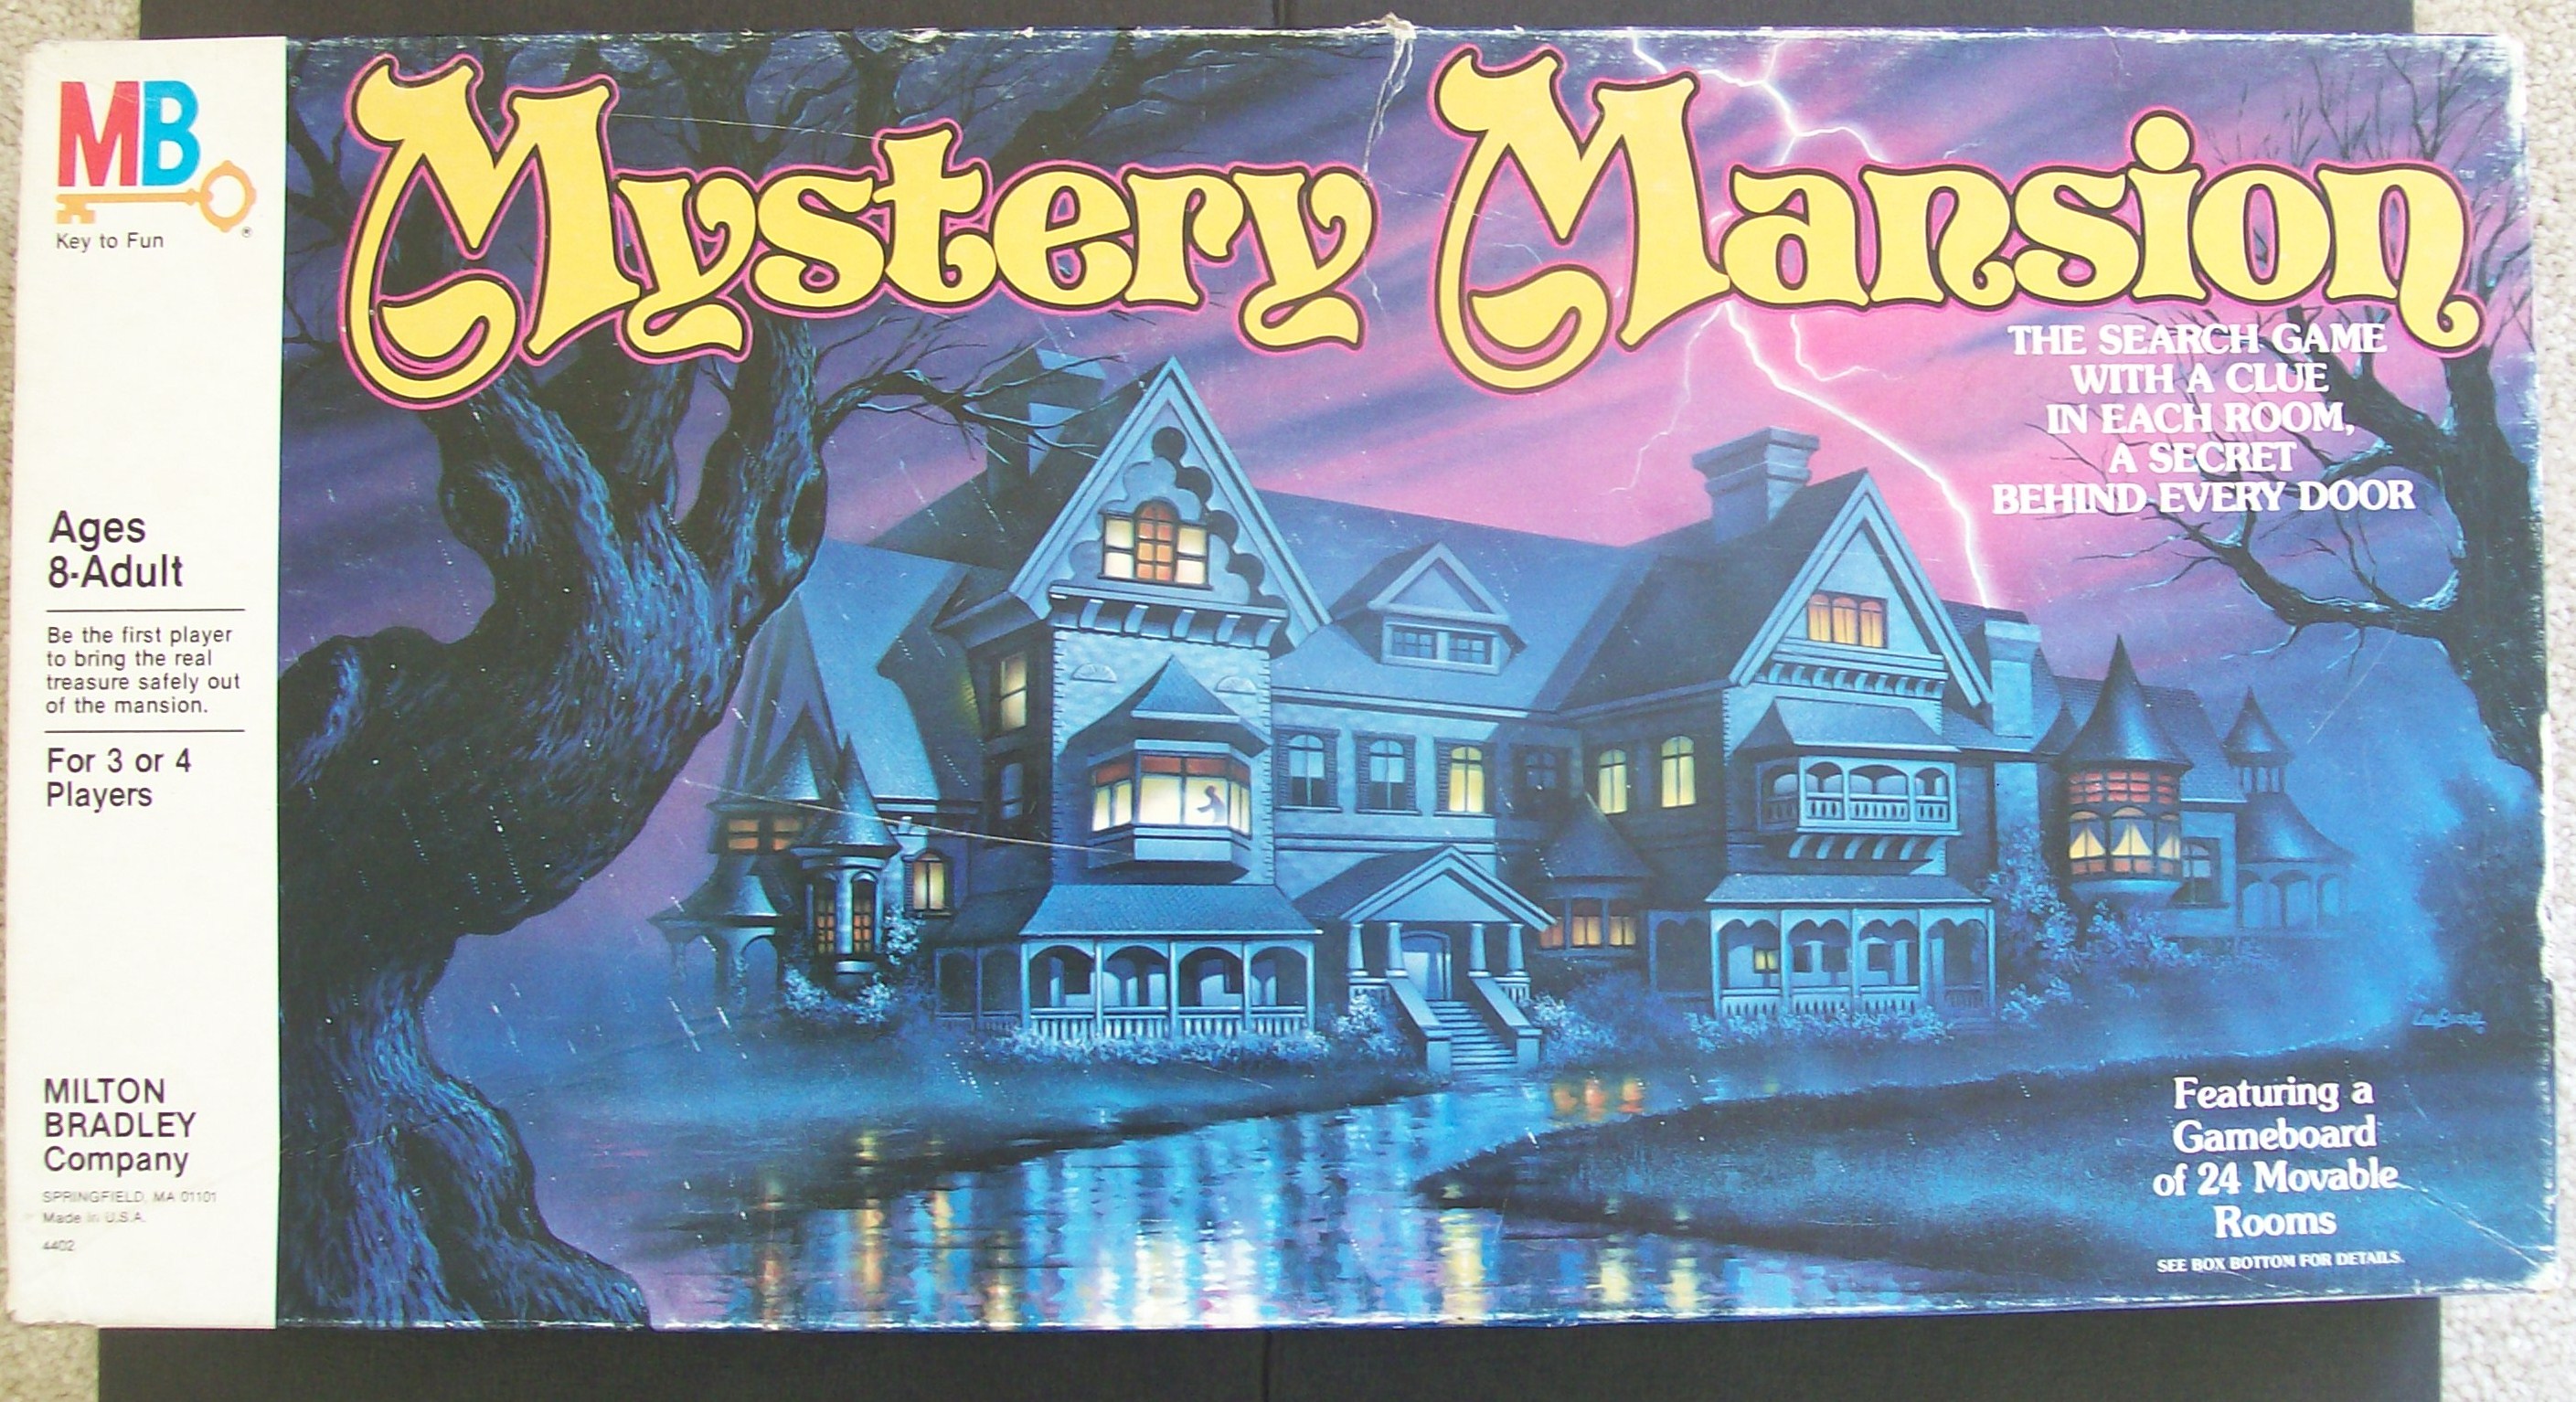 mystery games at home